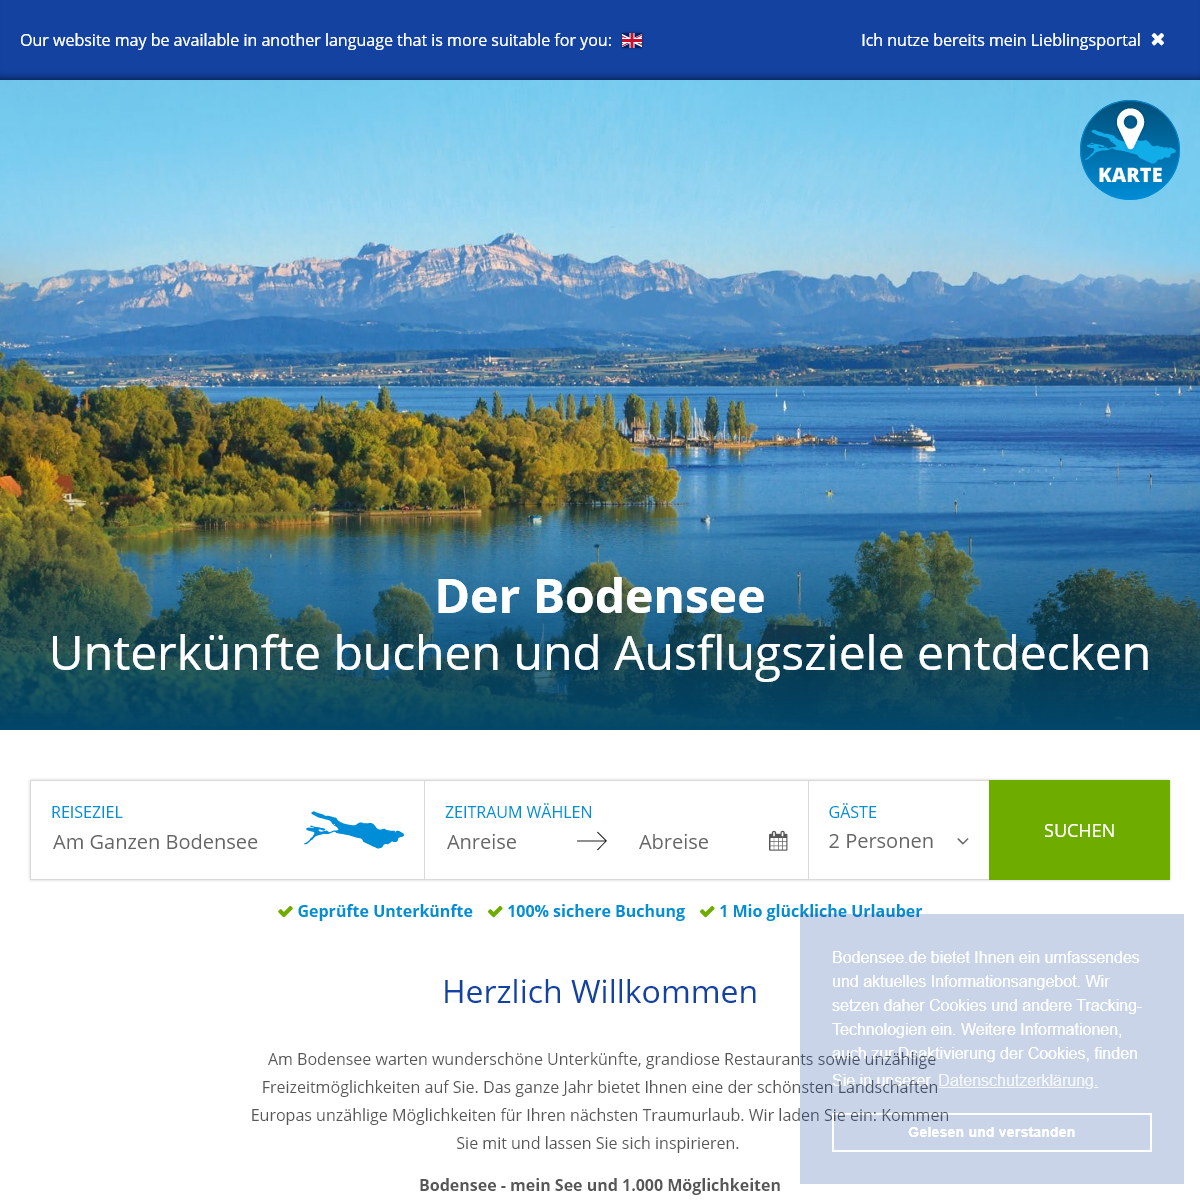 A complete backup of bodensee.de